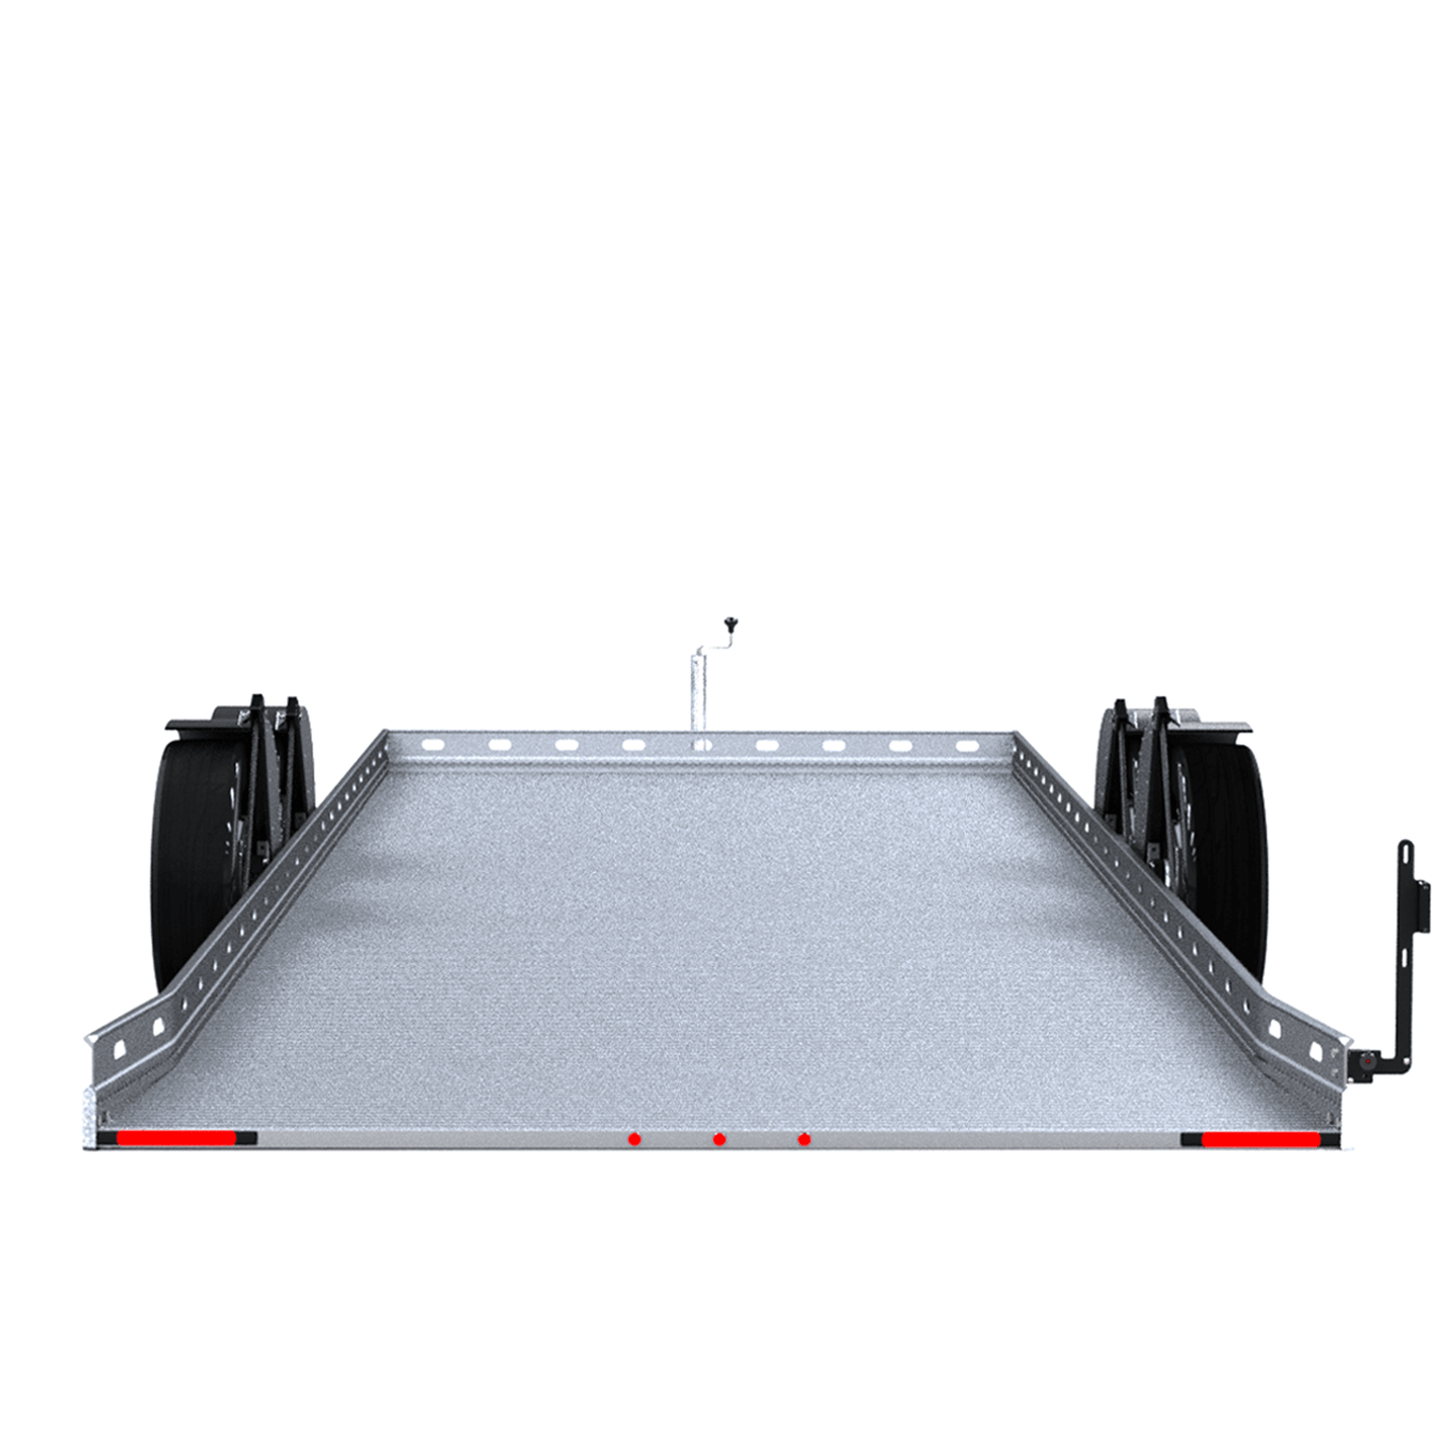 Pro Sport Lowering Trailer from $20,495*